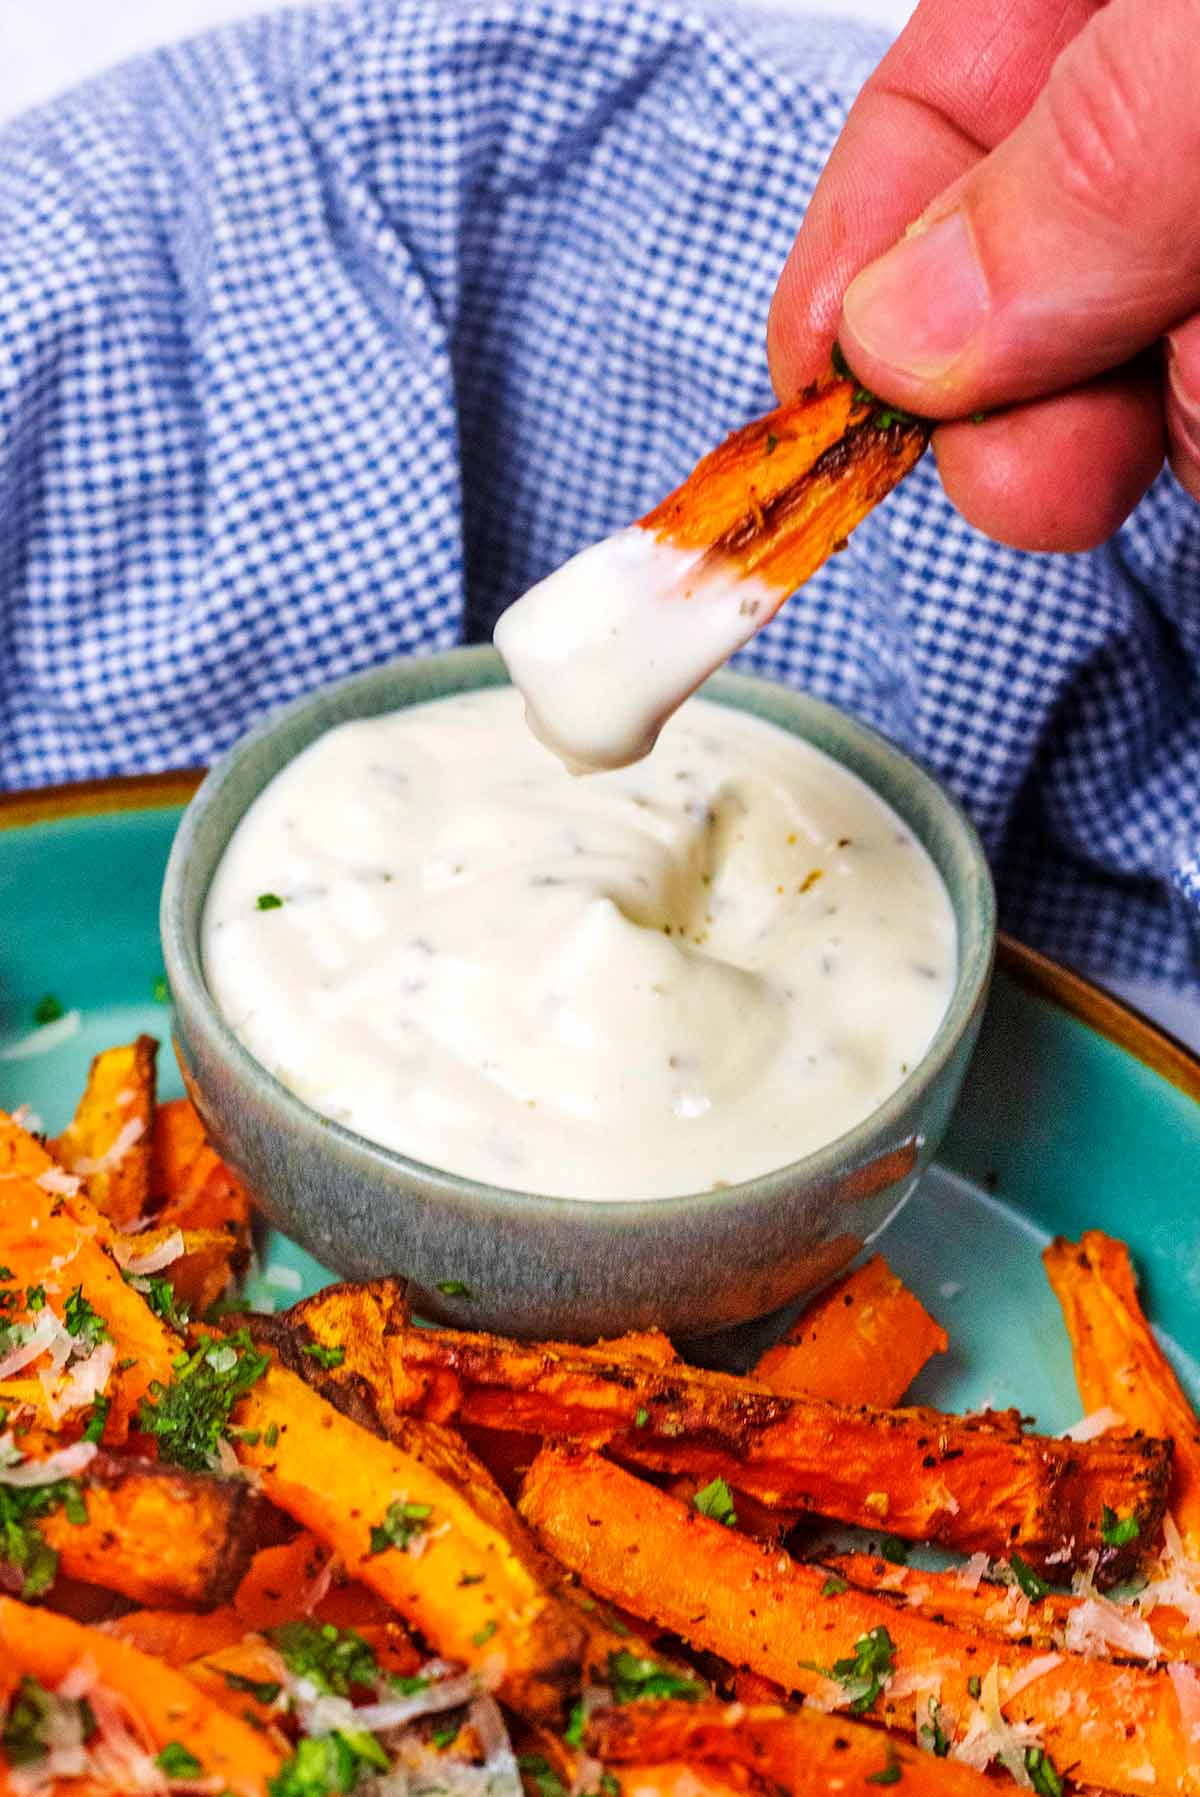 A cooked carrot being dipped into a small bowl of ranch sauce.